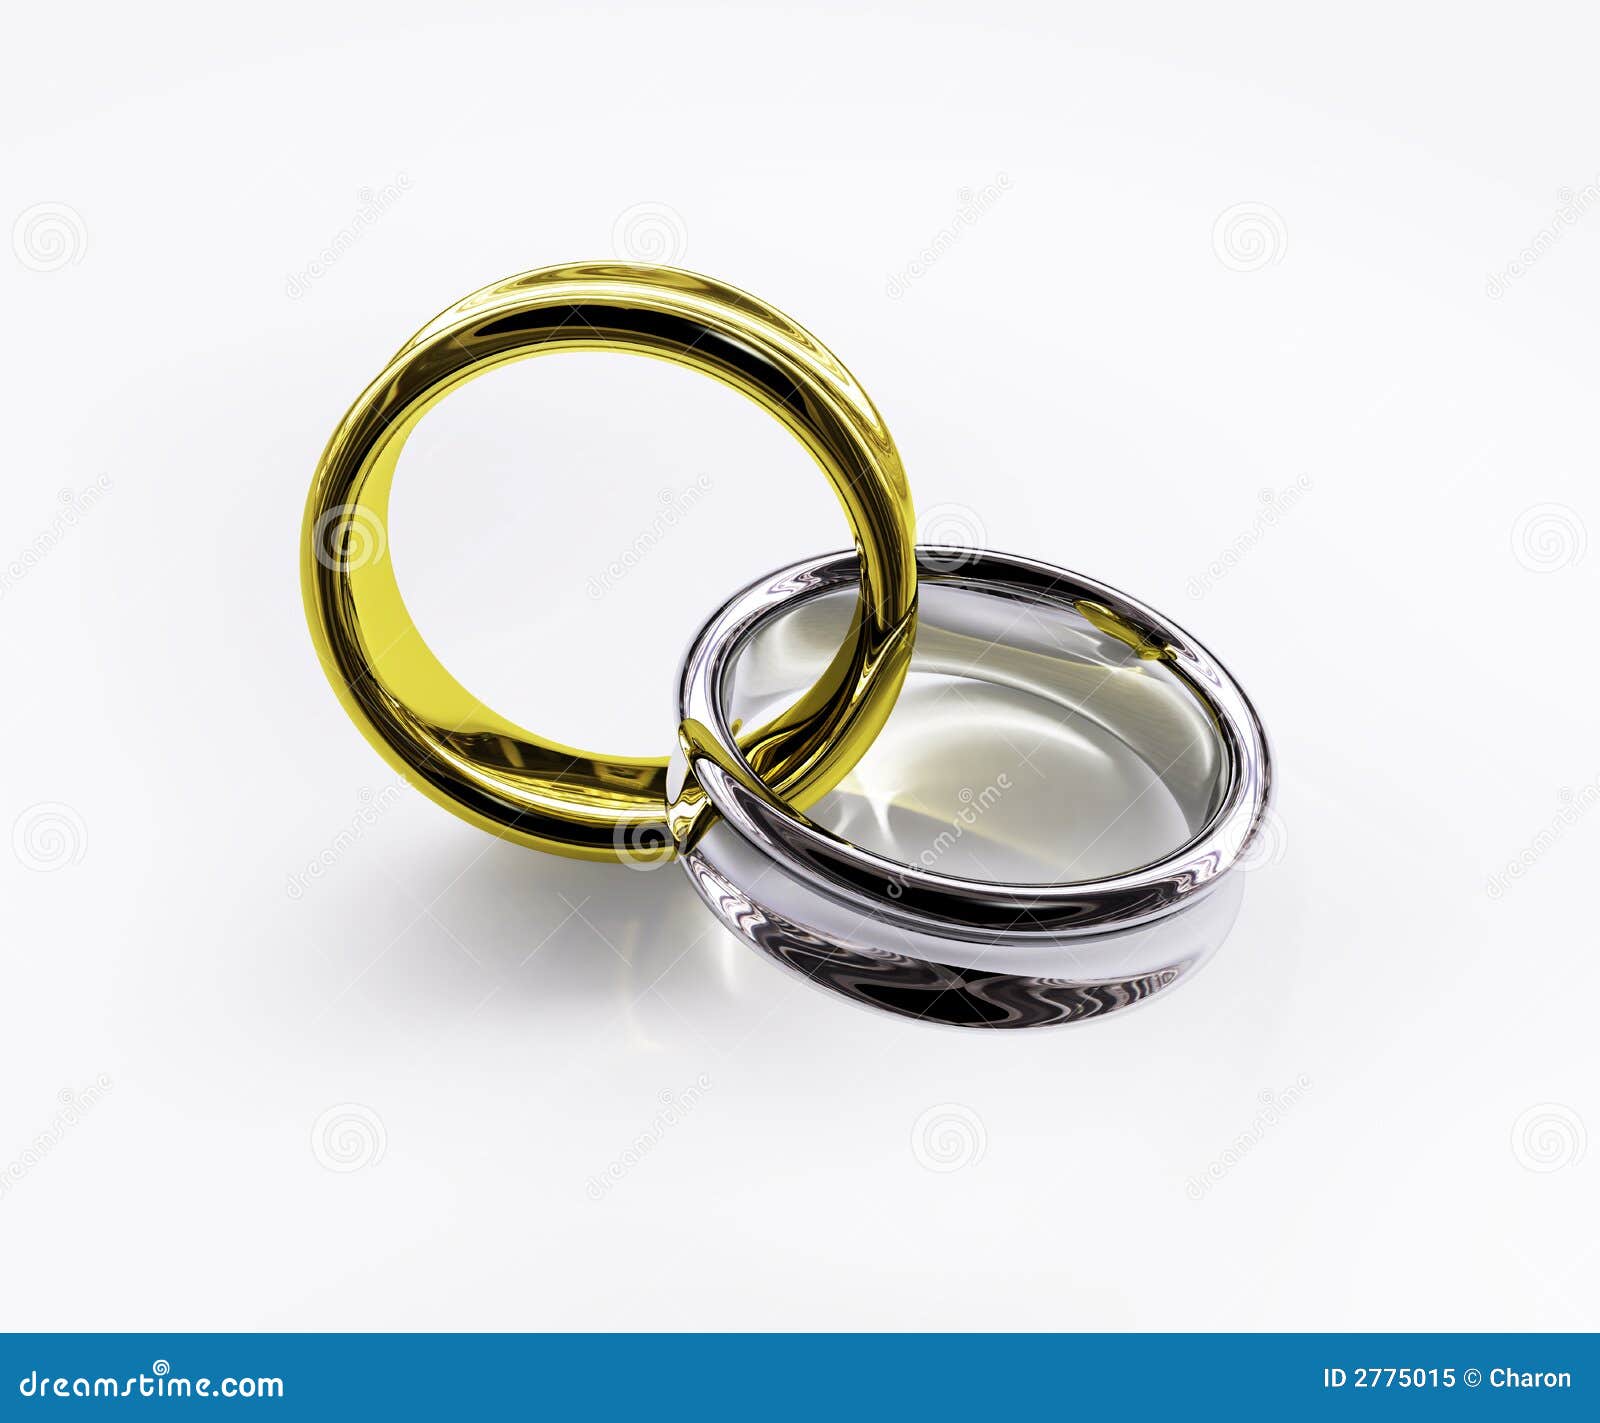 3D rendering of two interconnected reflective golden and silver rings ...